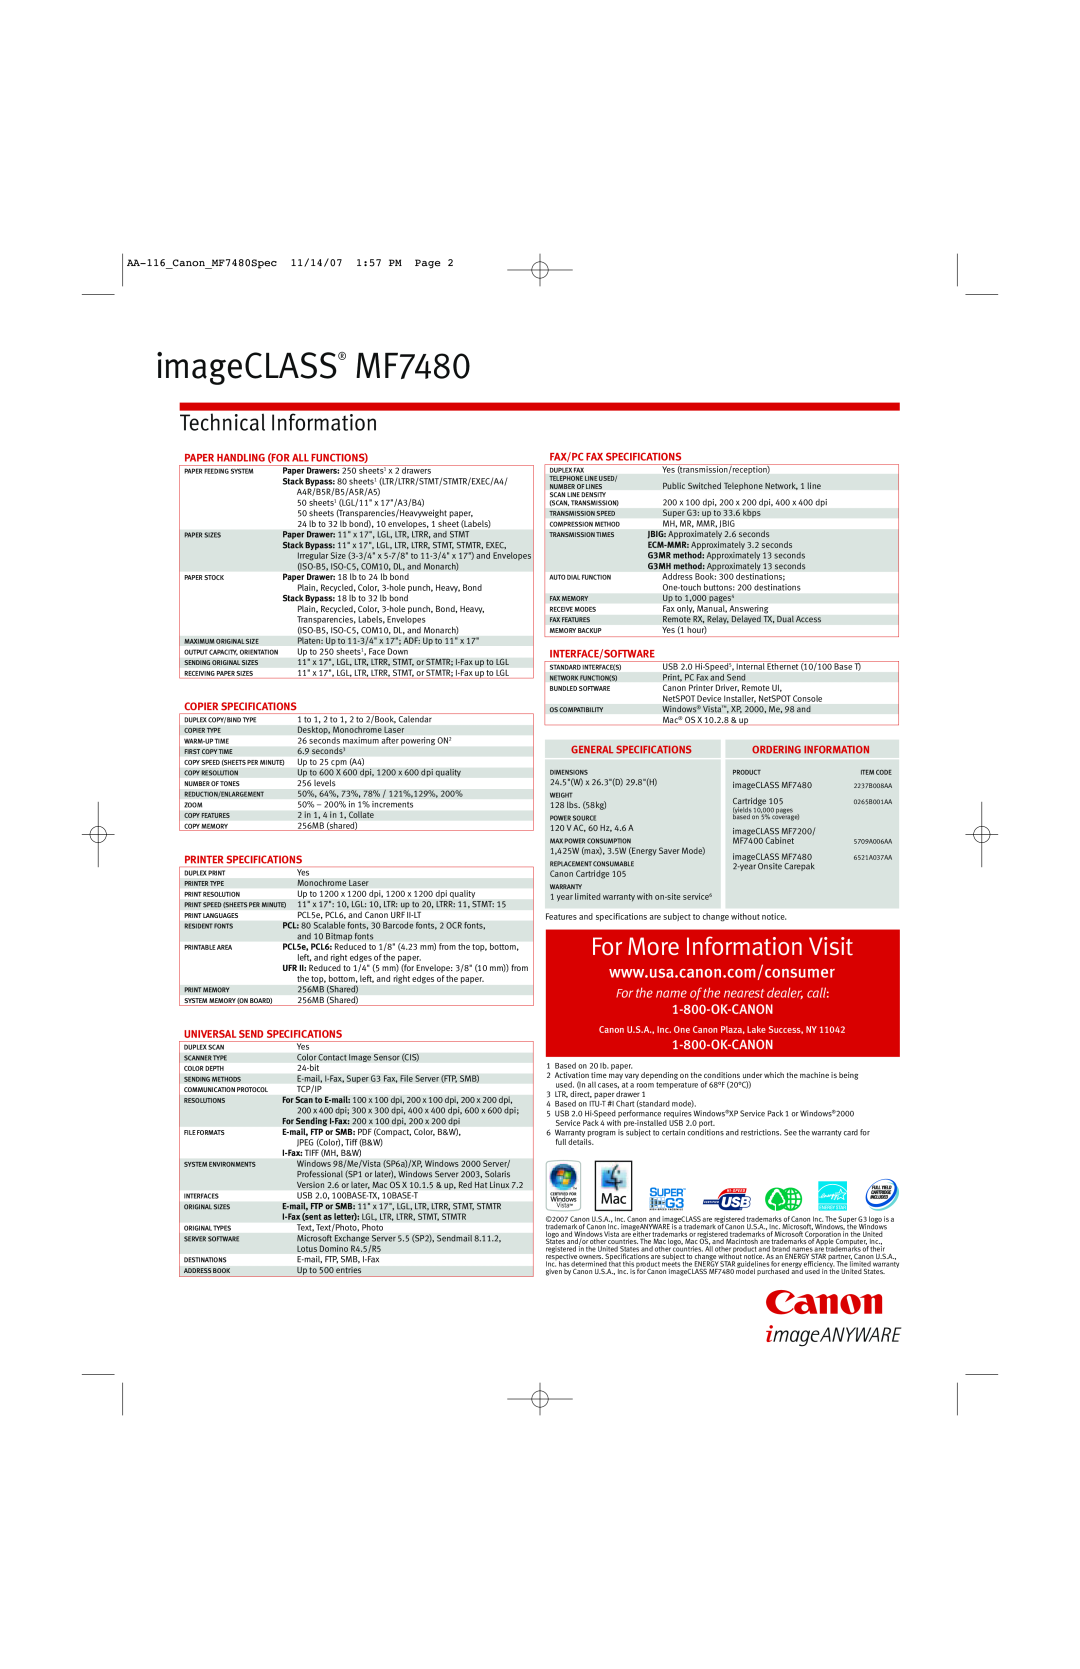 Canon imageCLASS MF7480, For More Information Visit, Technical Information, For the name of the nearest dealer, call 